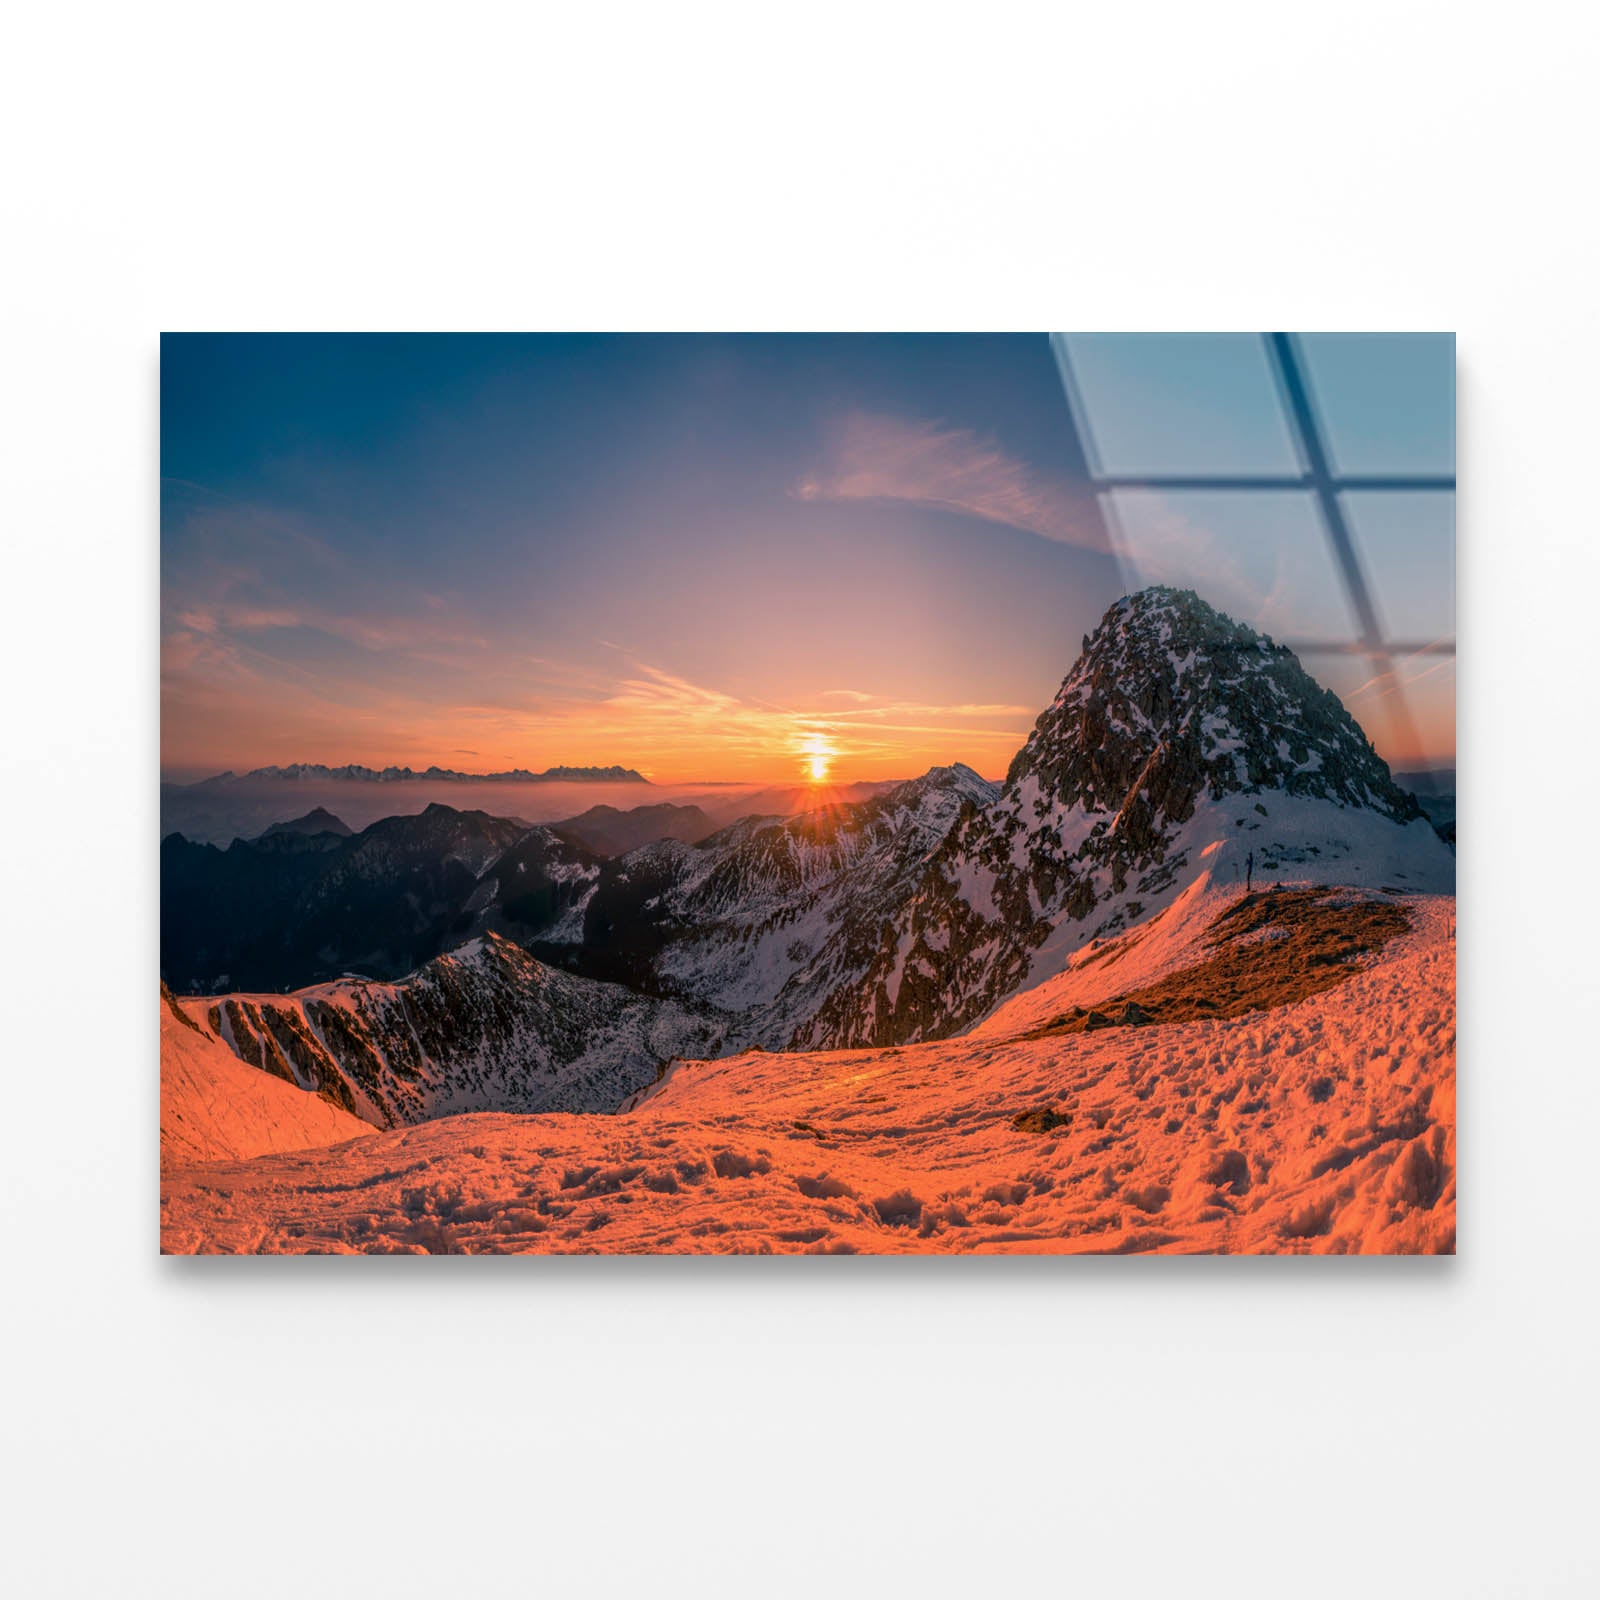 Sunrise in High Mountain Acrylic Glass Print Tempered Glass Wall Art 100% Made in Australia Ready to Hang